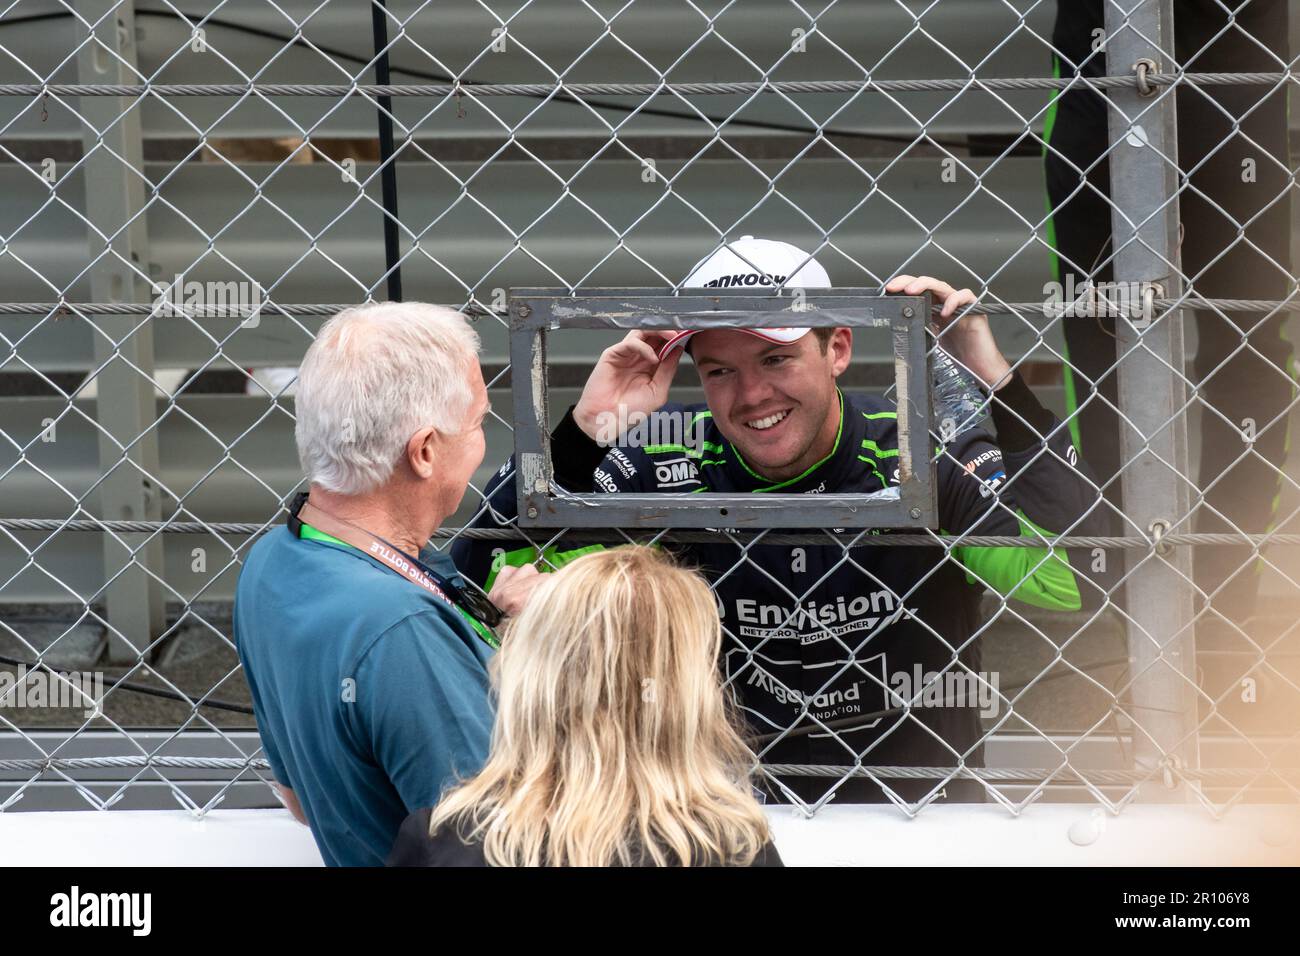 Winner Nick Cassidy (Envision Racing) talks to familiars on the finish line The winner of the 6th edition of the FIA ABB Formula E World Championship was Nick Cassidy of Envision Racing Team. It was his second consecutive triumph in his career. Stock Photo